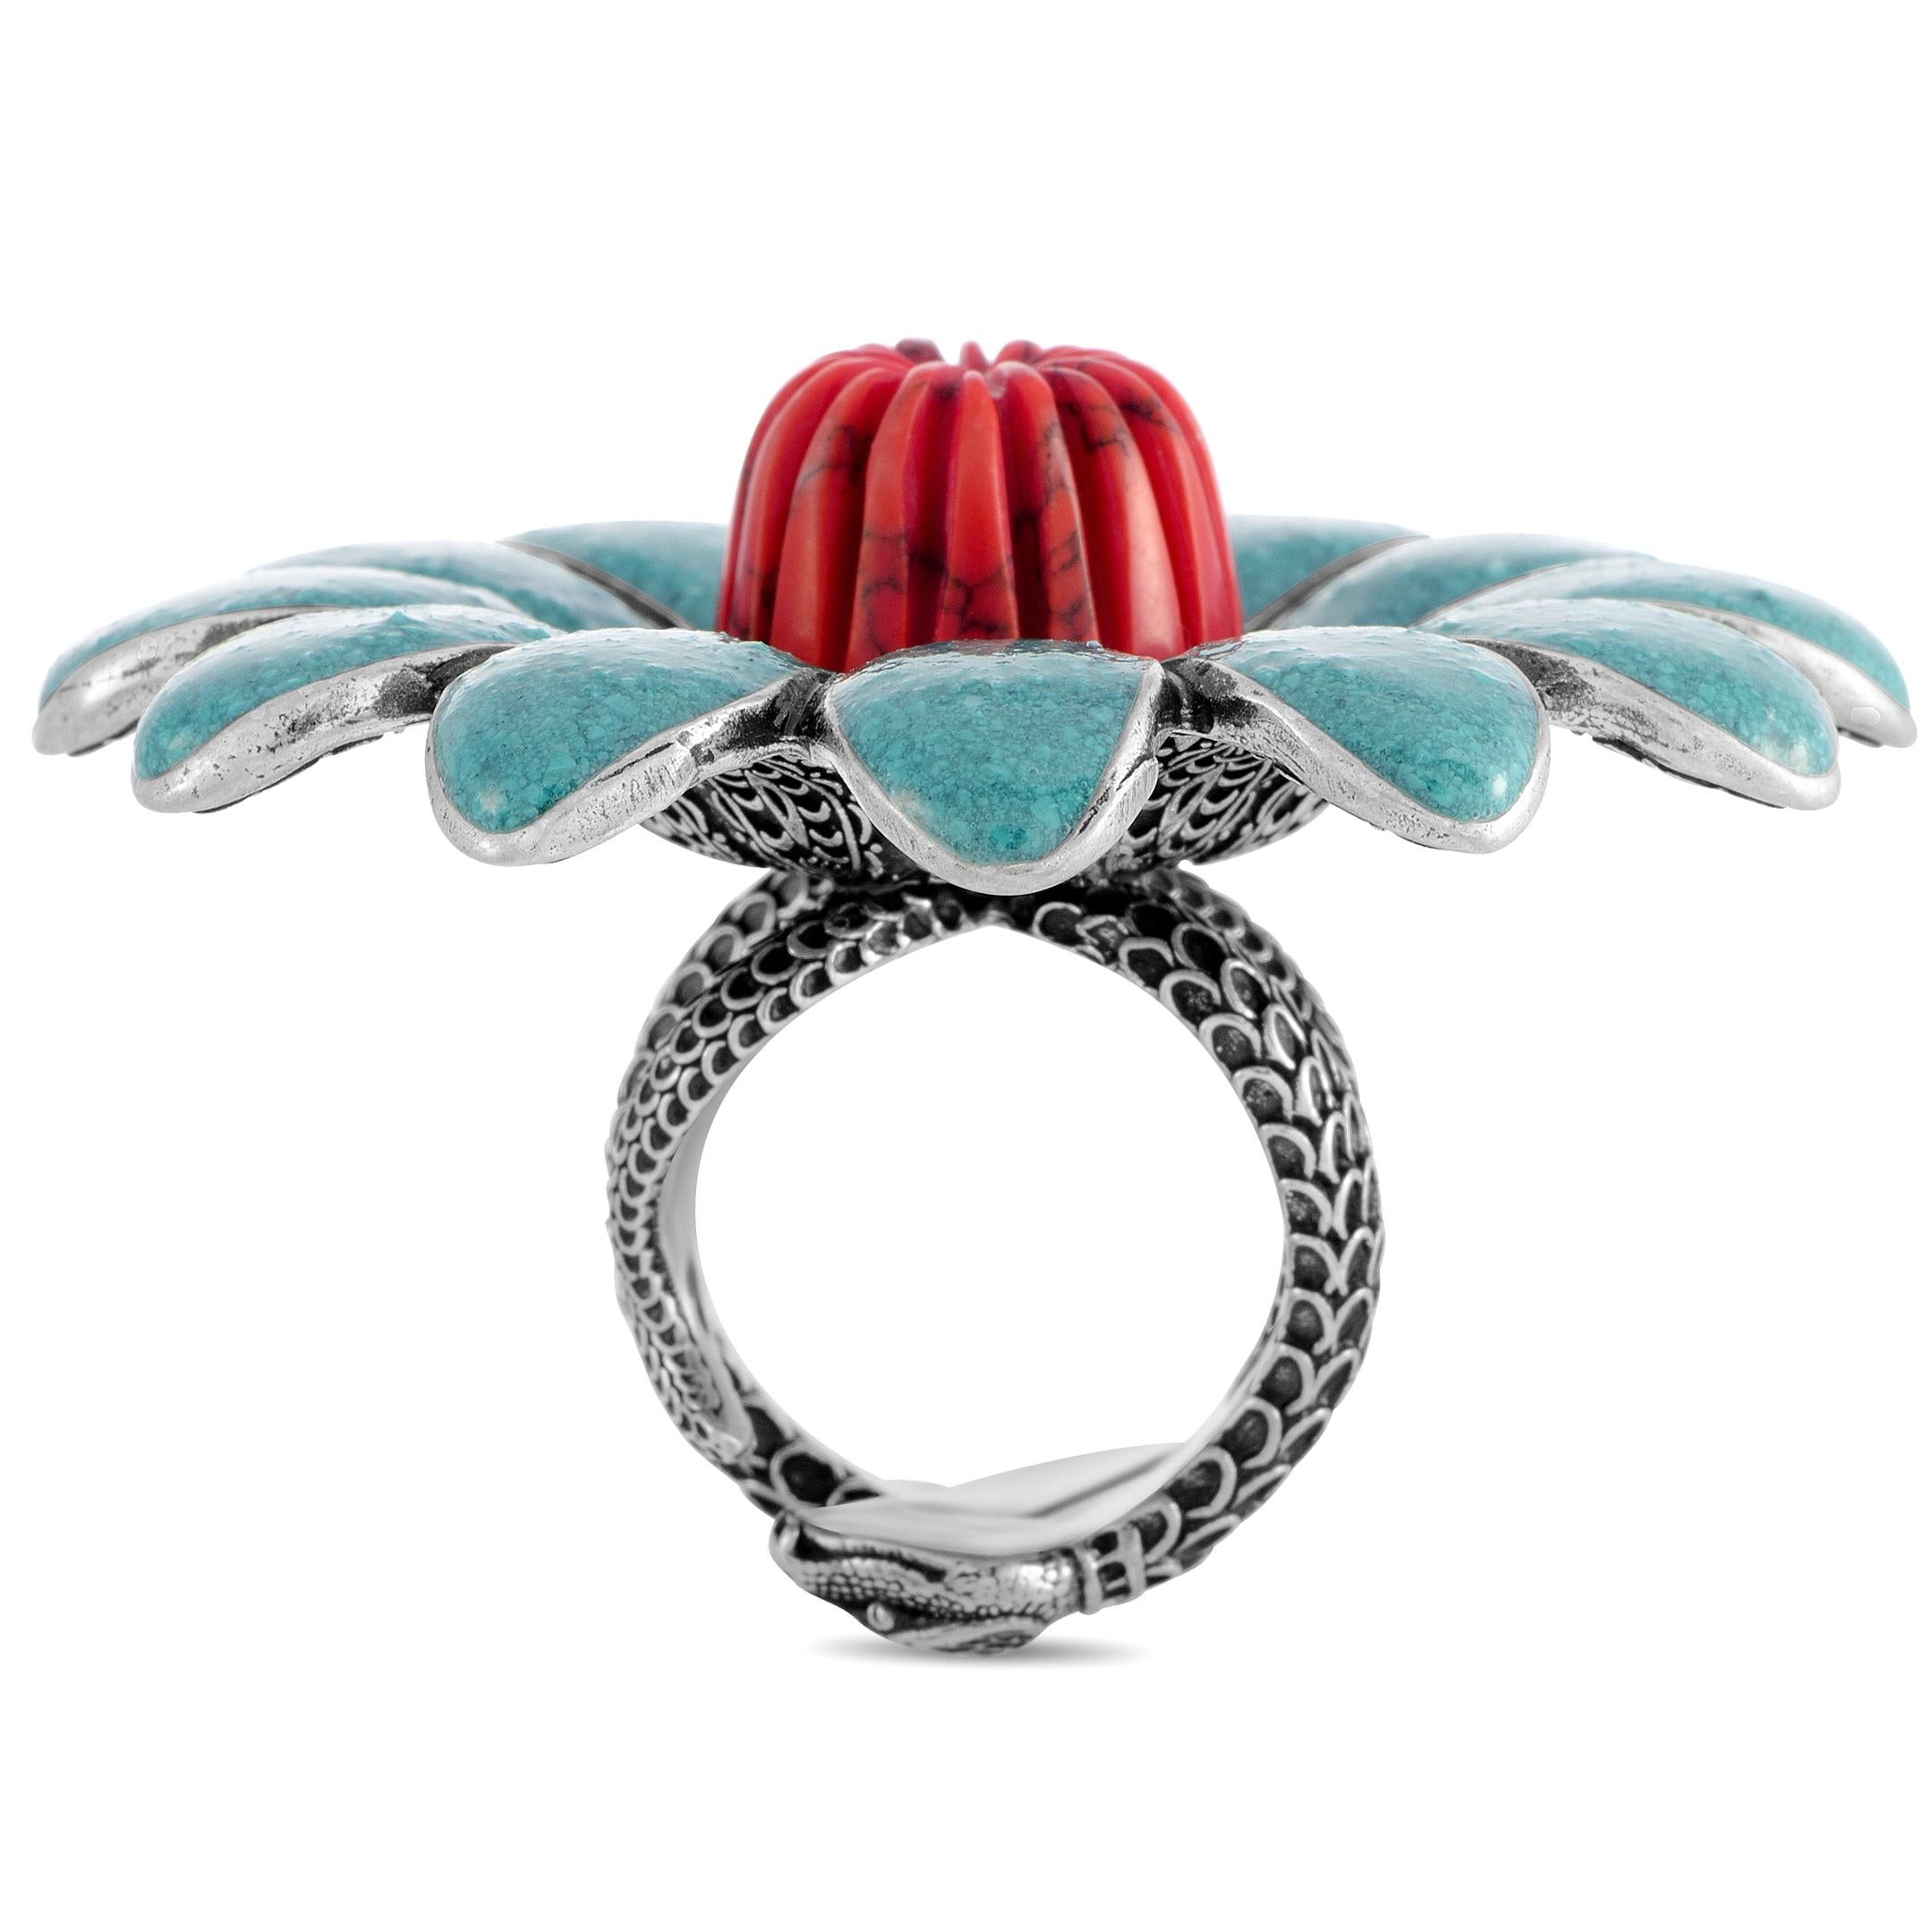 The Gucci “GG Marmont” ring is made out of sterling silver, turquoise enamel and coral resin. The ring weighs 44.1 grams, boasting band thickness of 11 mm and top height of 16 mm, while top dimensions measure 50 by 50 mm.
 
 This jewelry piece is